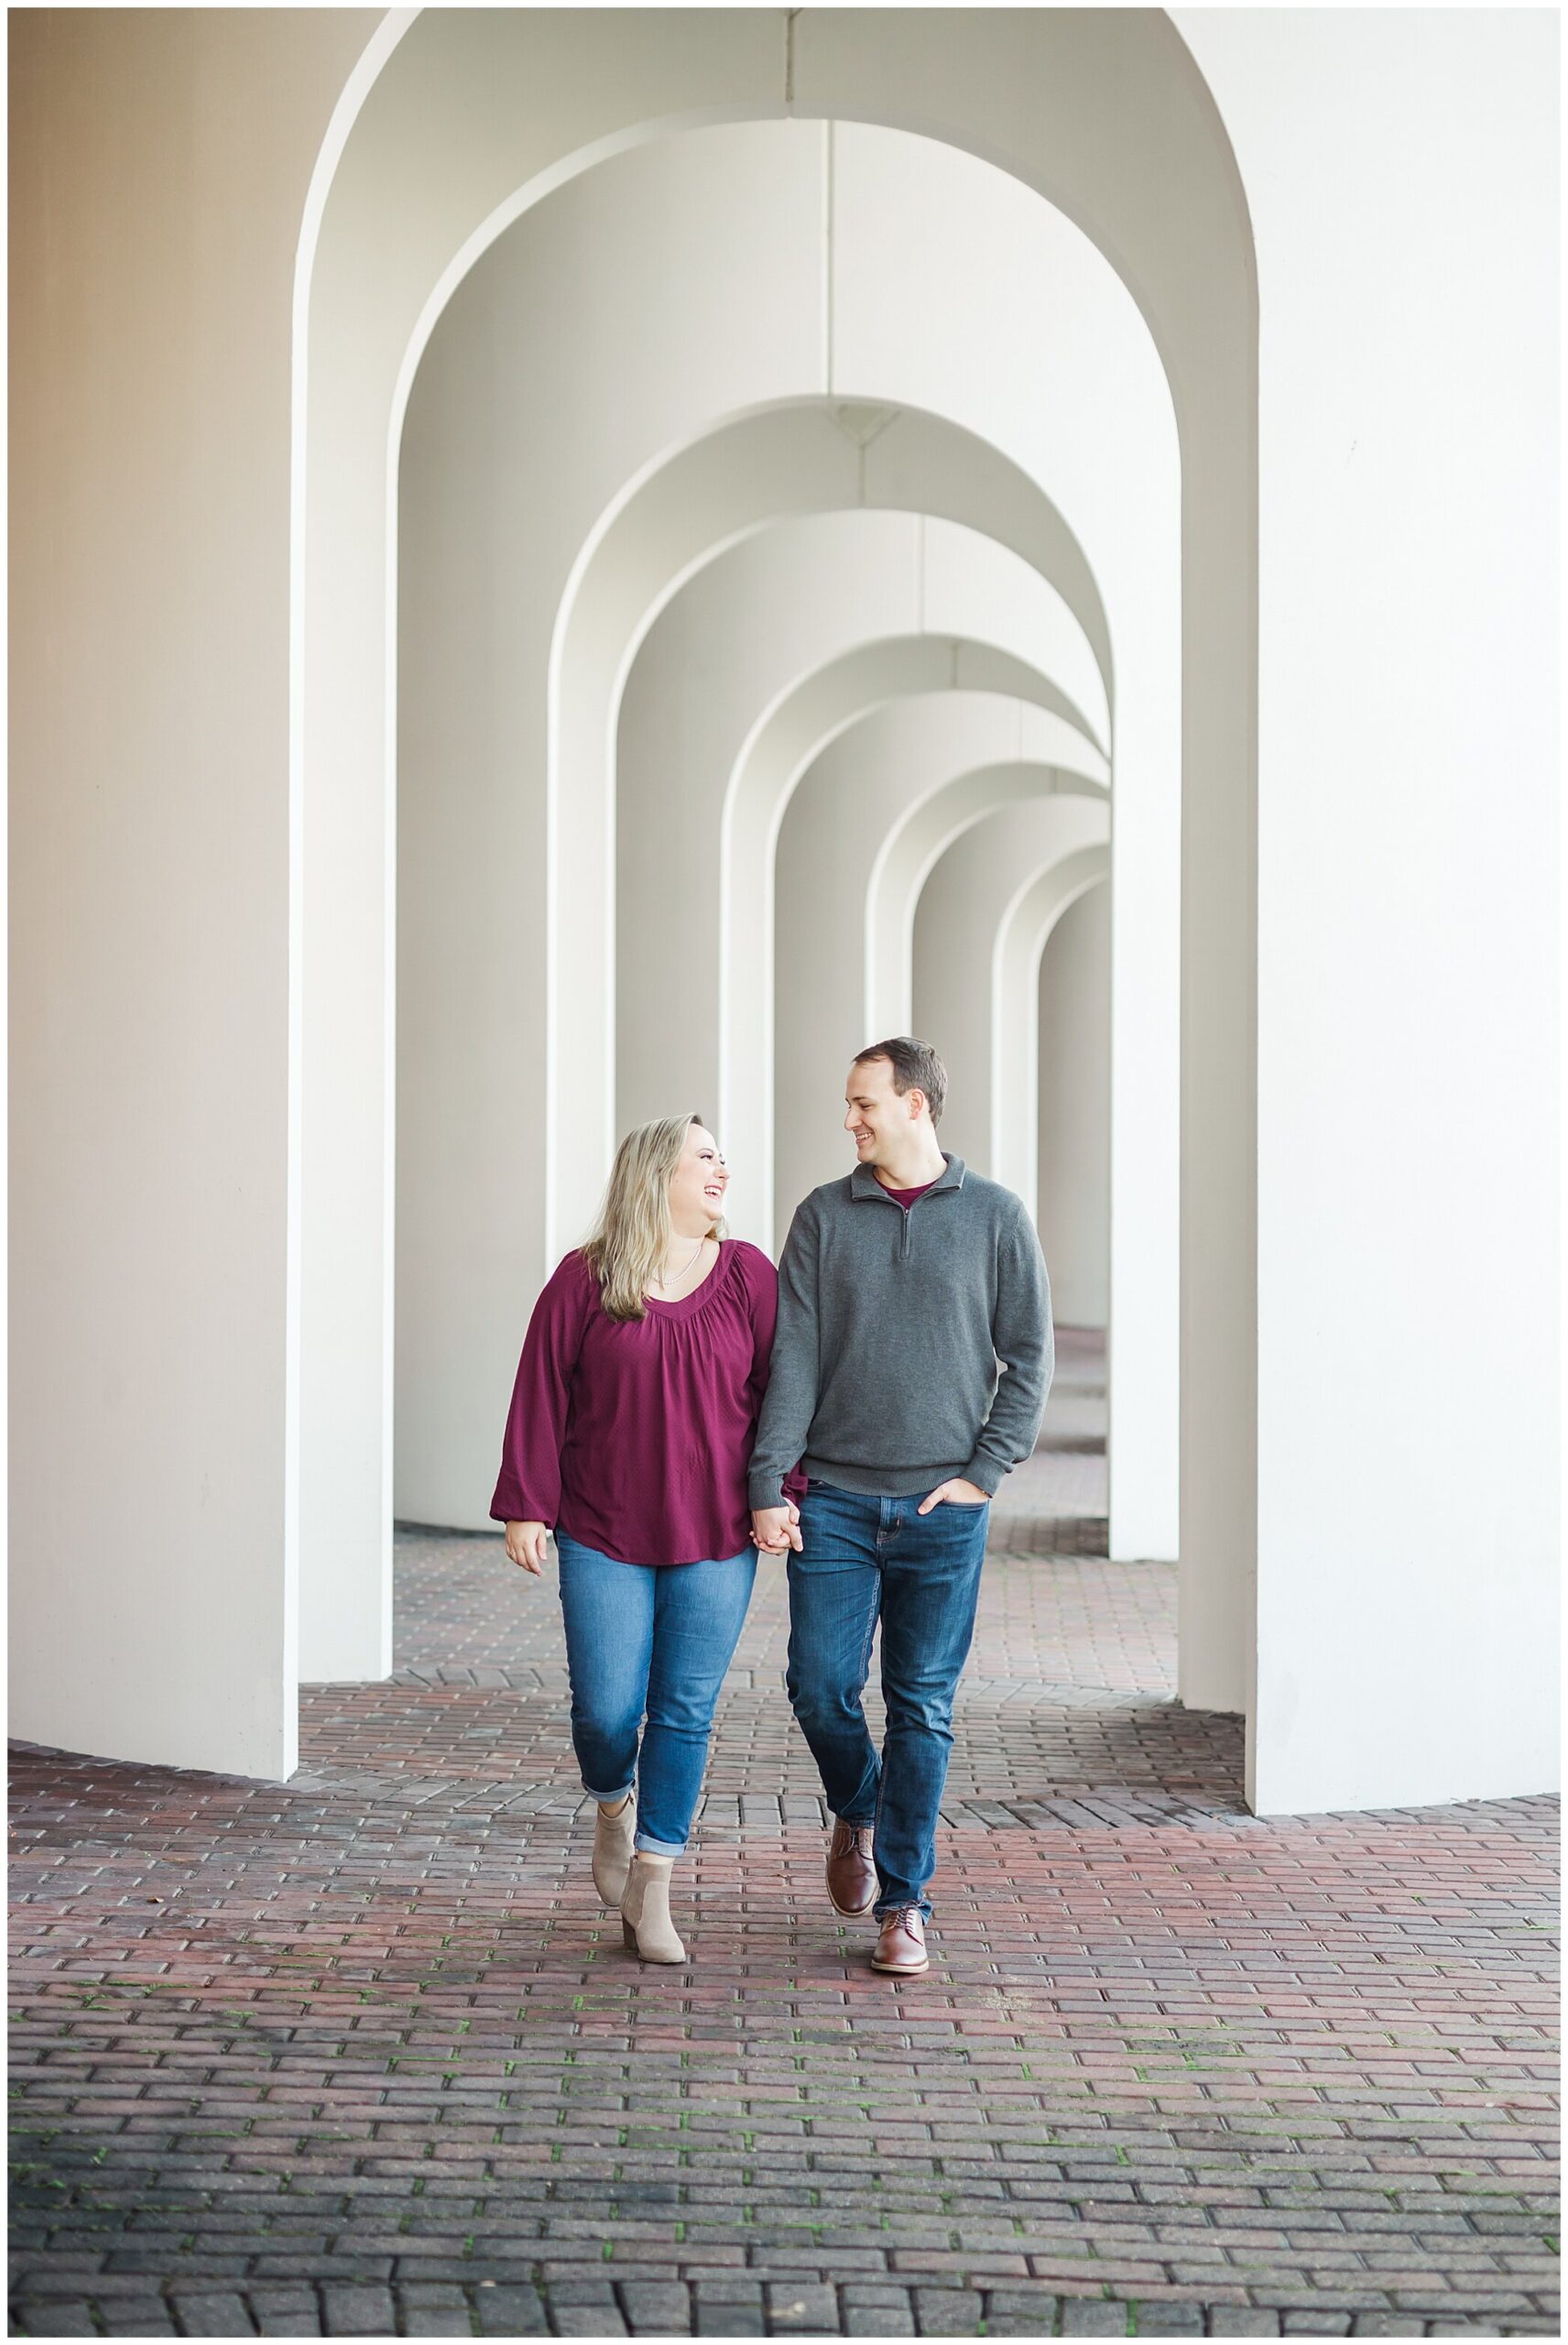 engaged couple walks through archway at Christopher Newport University